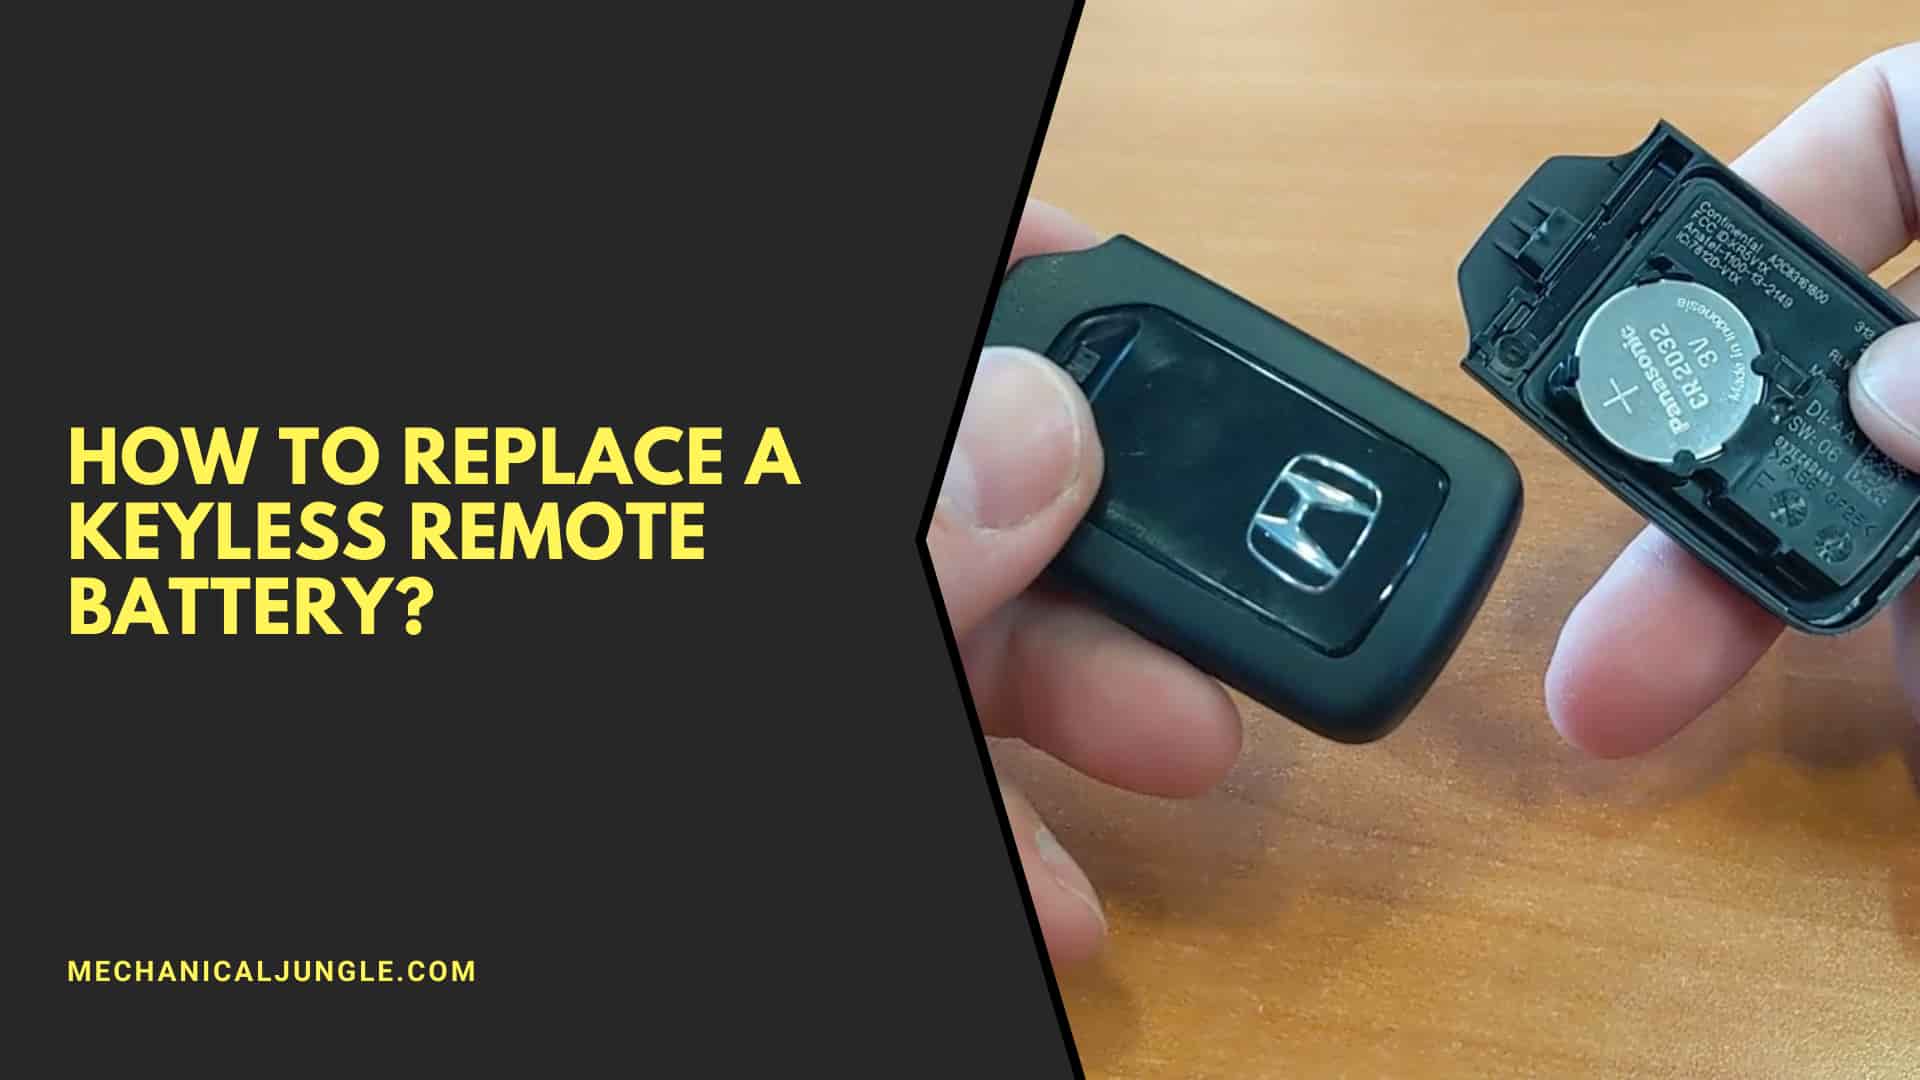 How to Replace a Keyless Remote Battery?